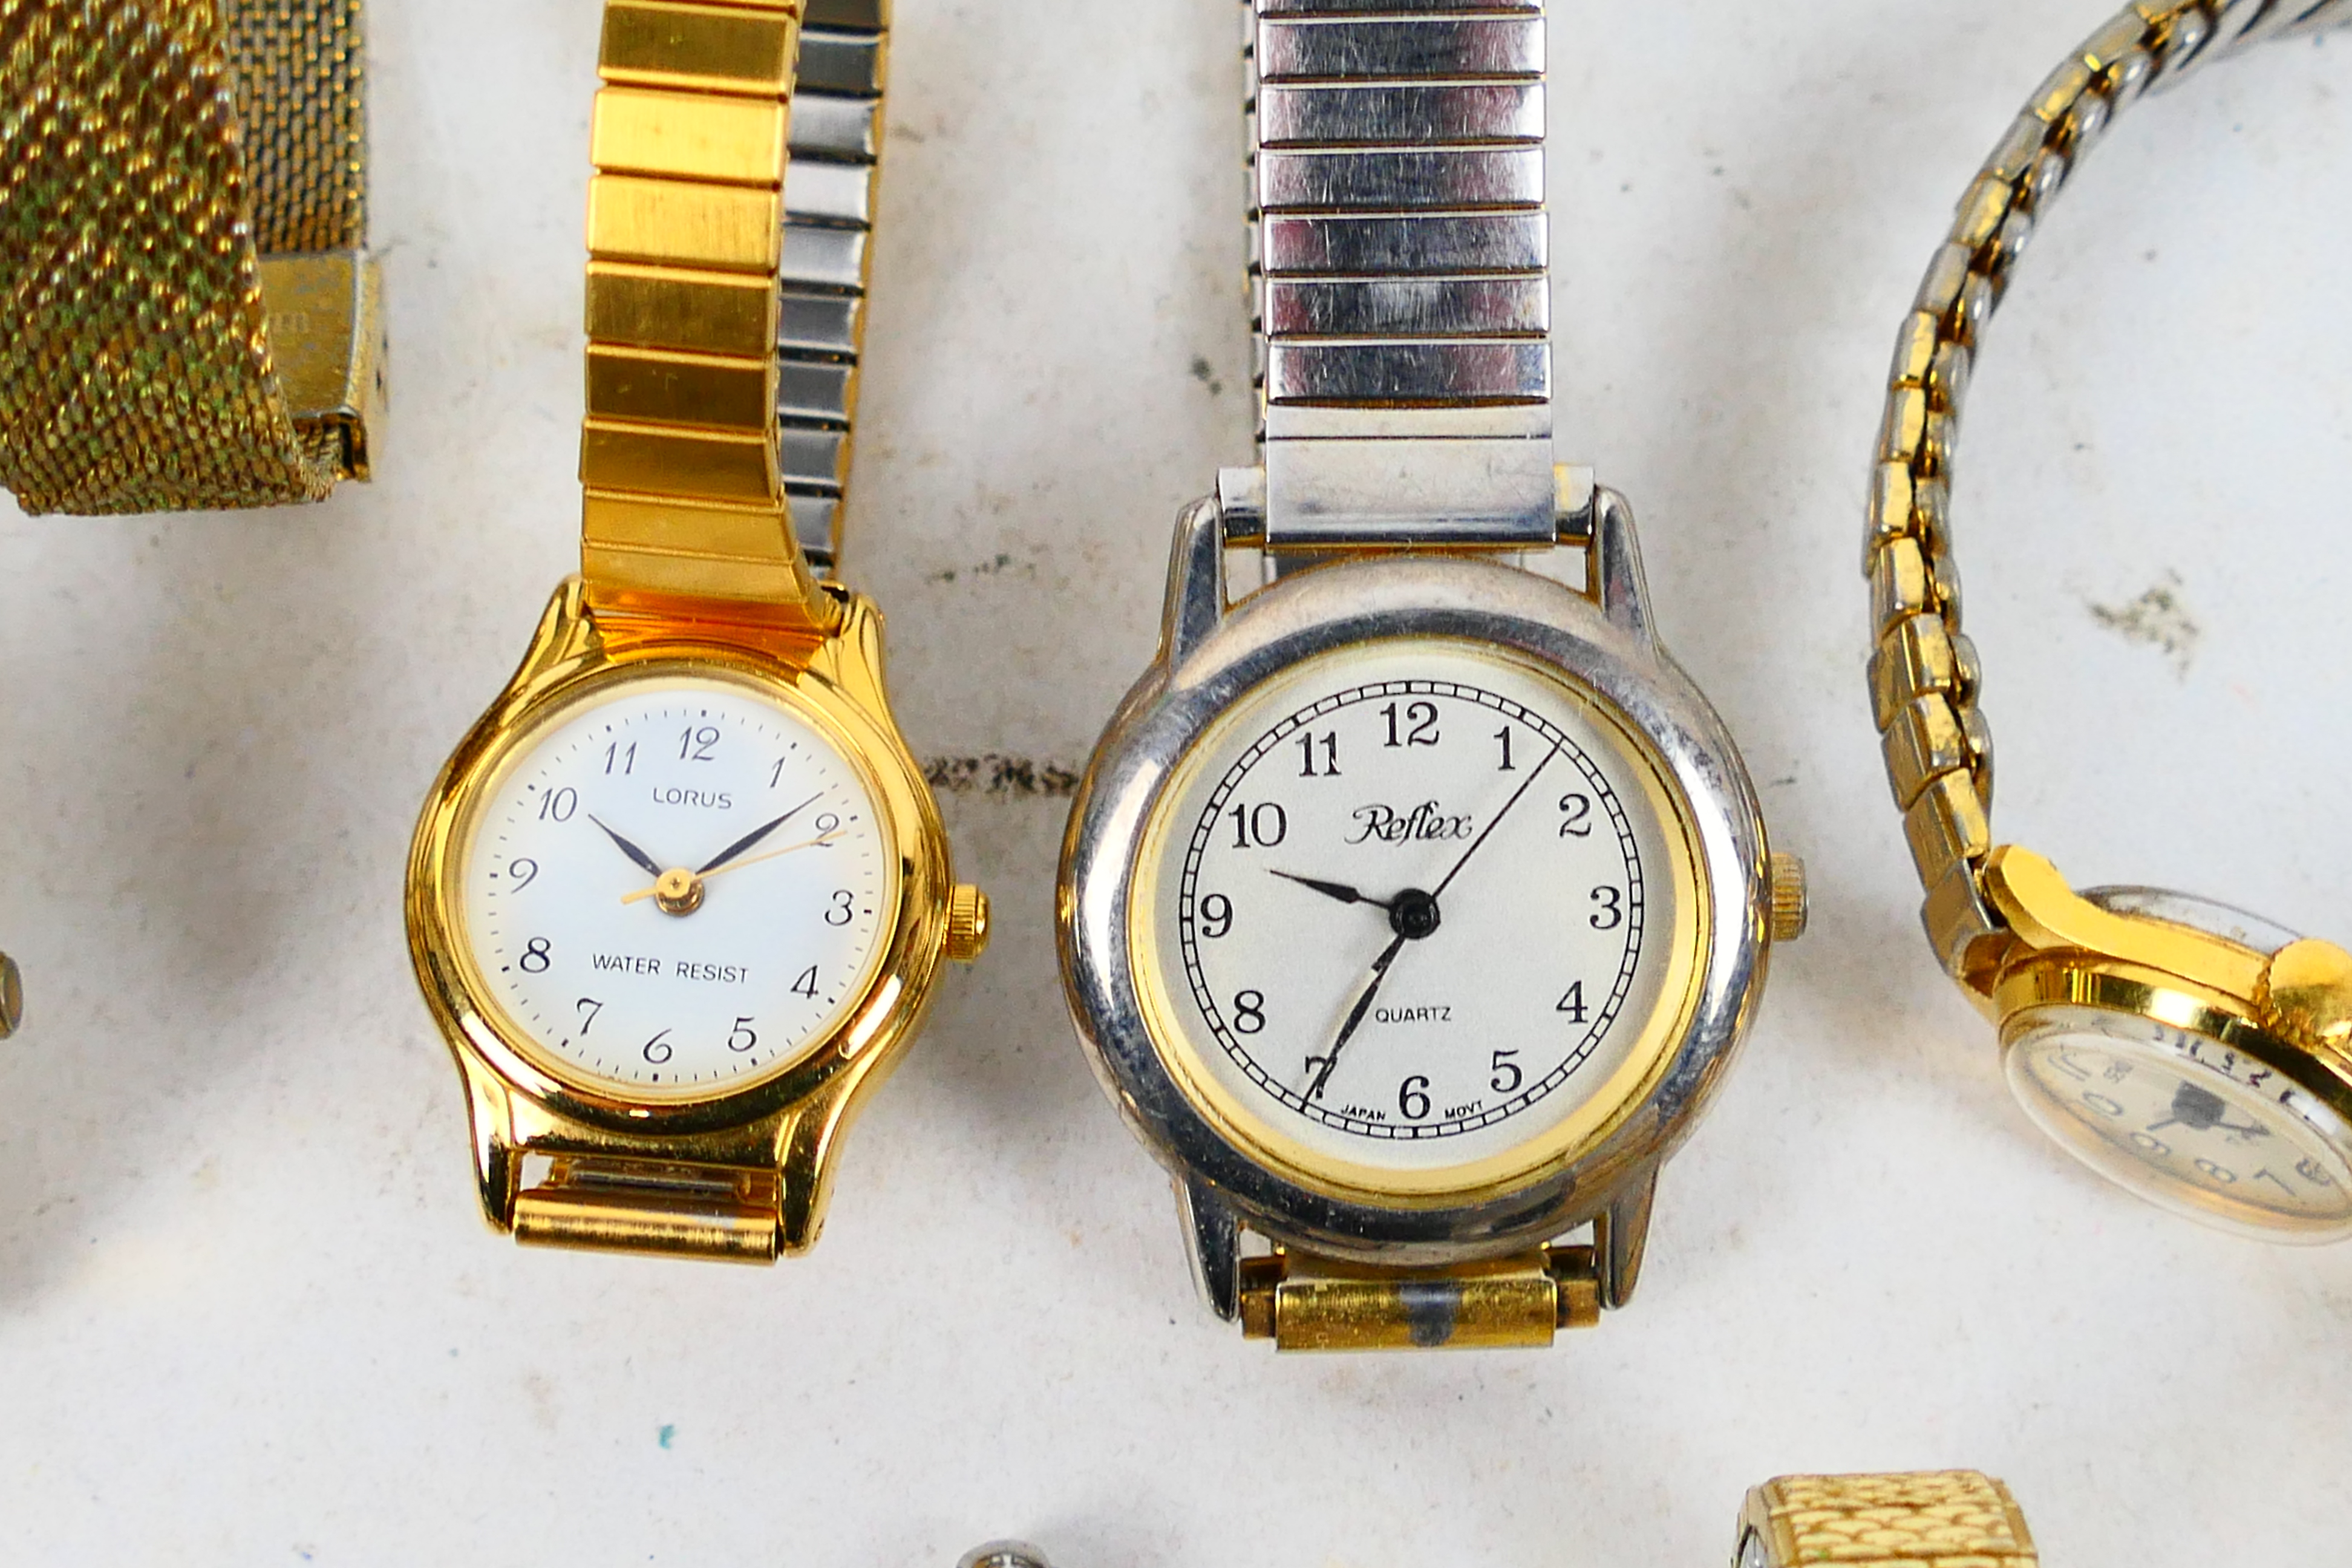 A collection of wrist watches to include Sekonda, Ingersoll, Reflex, Pulsar and similar. - Image 3 of 8